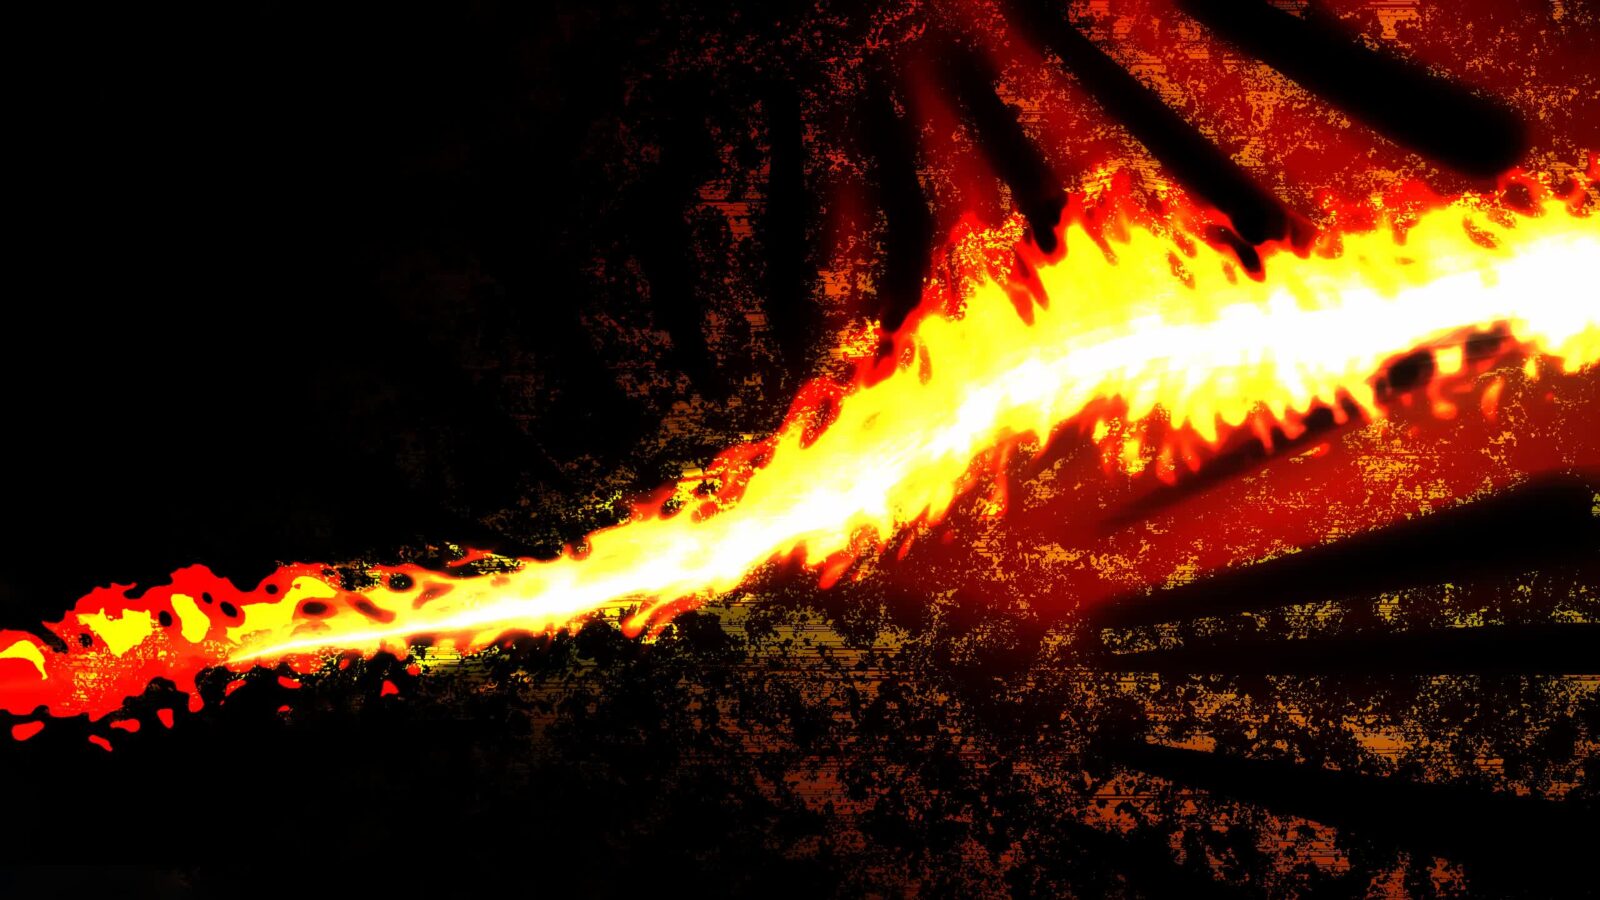 LiveWallpapers4Free.com | Abstract Fire Flame 2K Artwork - Free Live Wallpaper